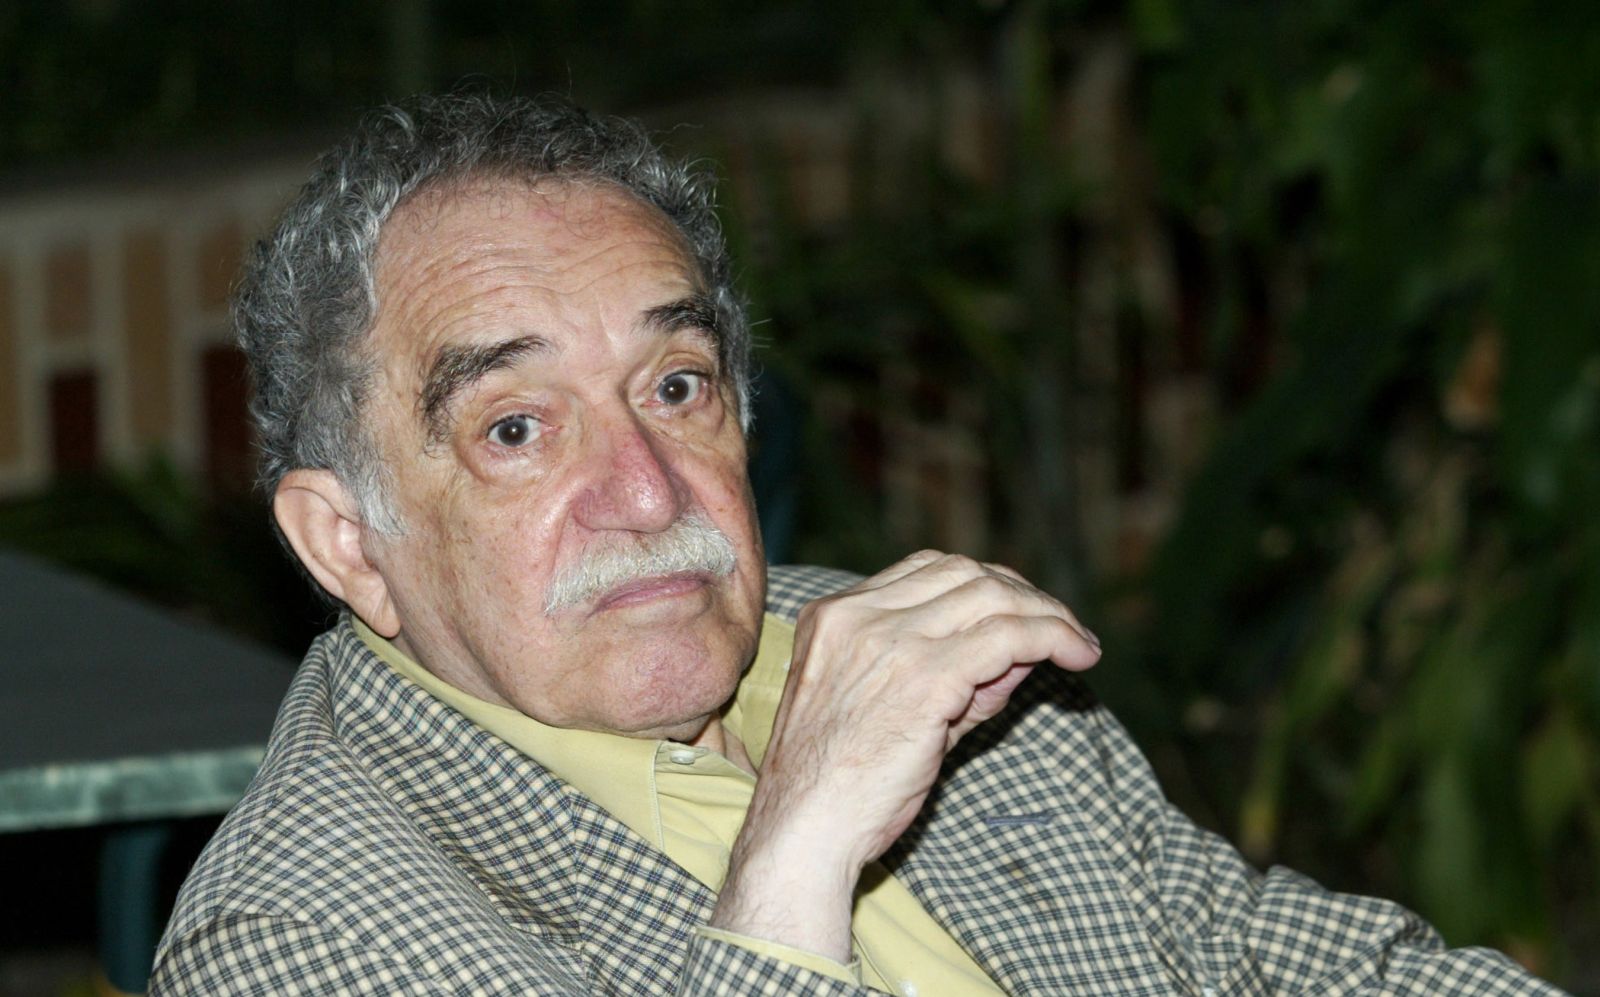 12.22.2005 . The Colombian writer Gabriel Garcia Marquez, participates as a mediator in the peace talks between the National Liberation Army (ELN) and the Government of Colombia in Havana, Cuba, December 12, 2005. Credit: Jorge Rey/MediaPunch/IPX